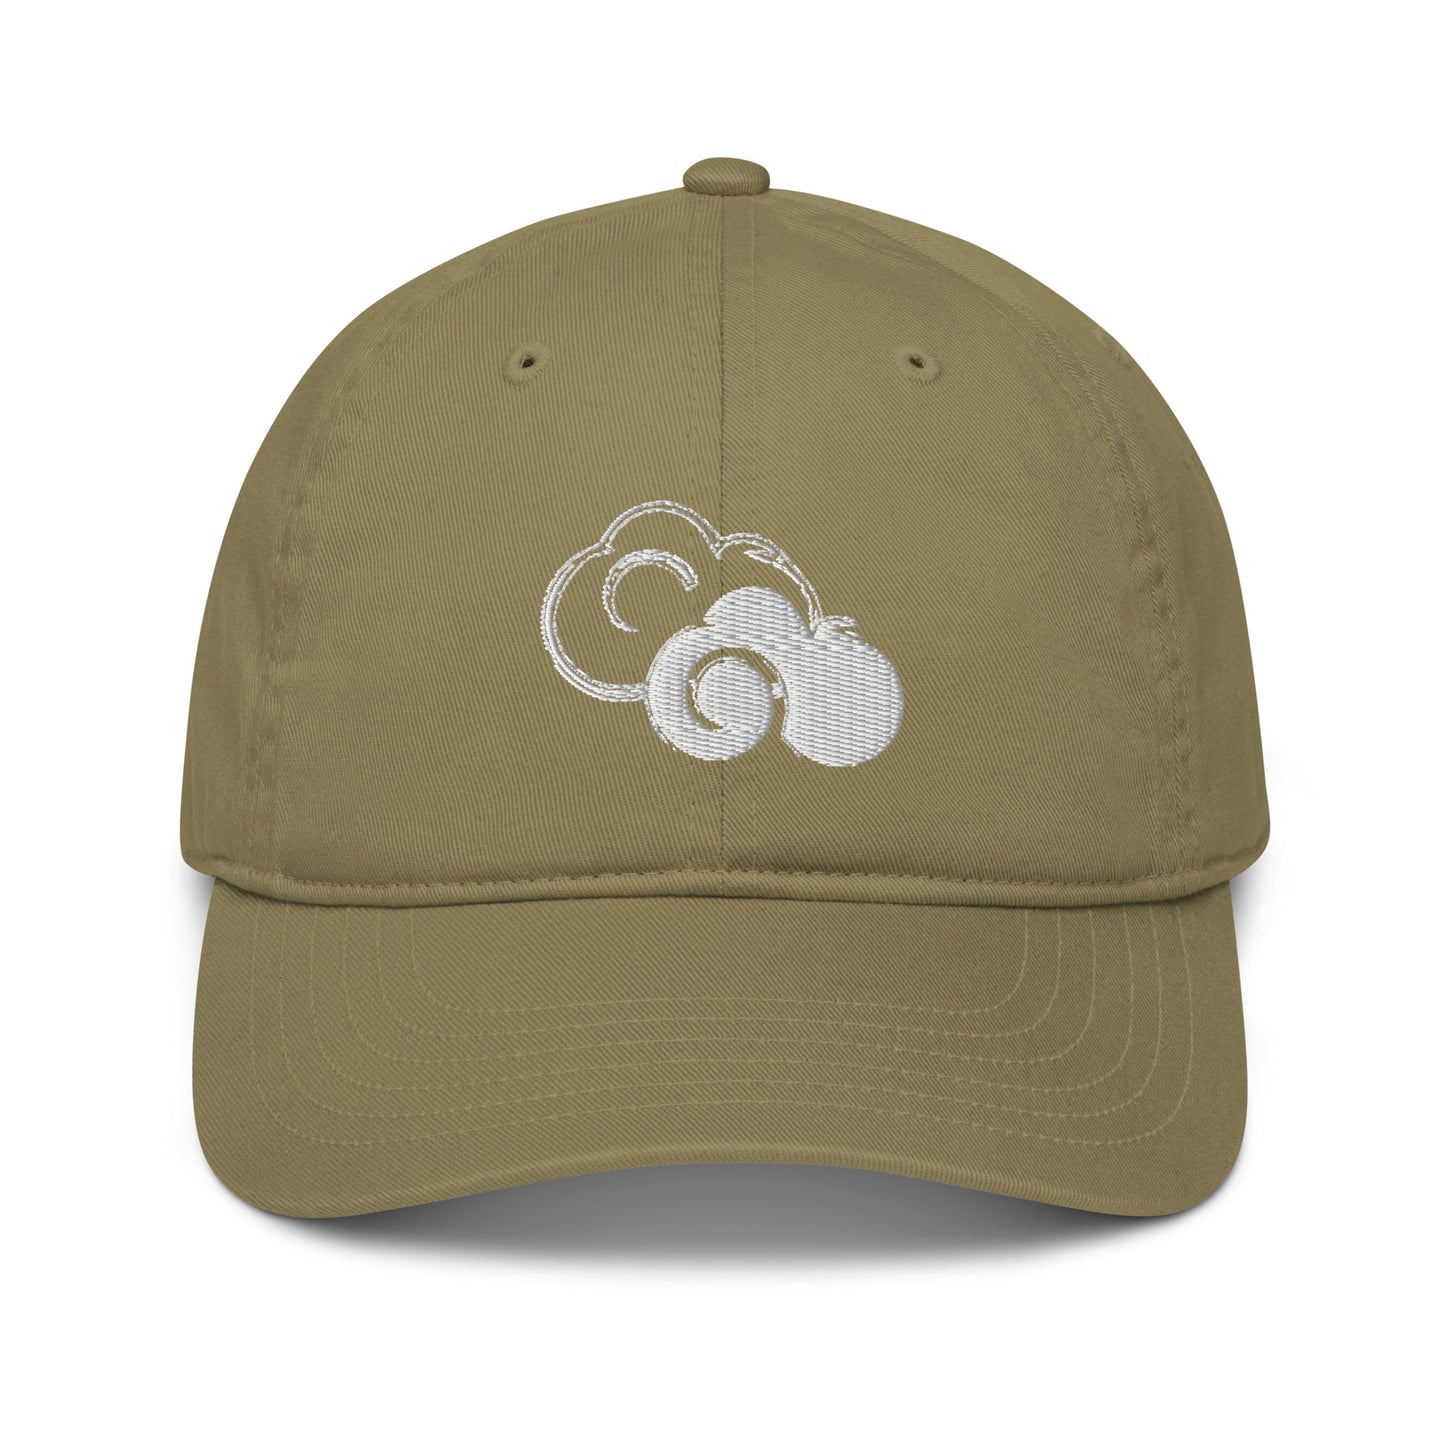 Our Zen Clouds Organic Dad Hat